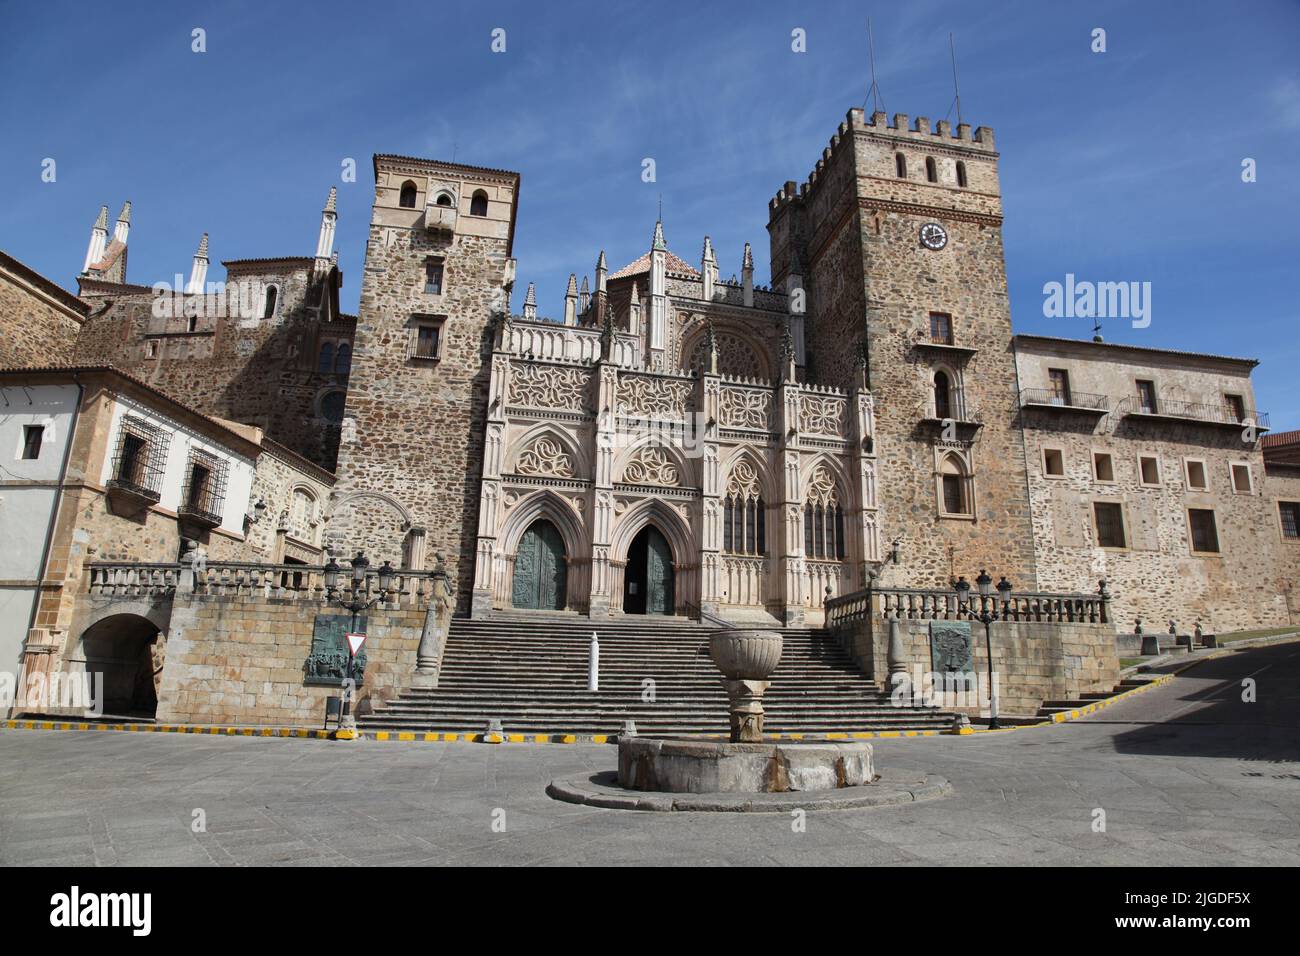 The historic 'Real Monasterio De Santa Maria' in Guadalupe Extremedura Spain. This monastery is a UNESCO world heritage site and dates back to 1340. Stock Photo